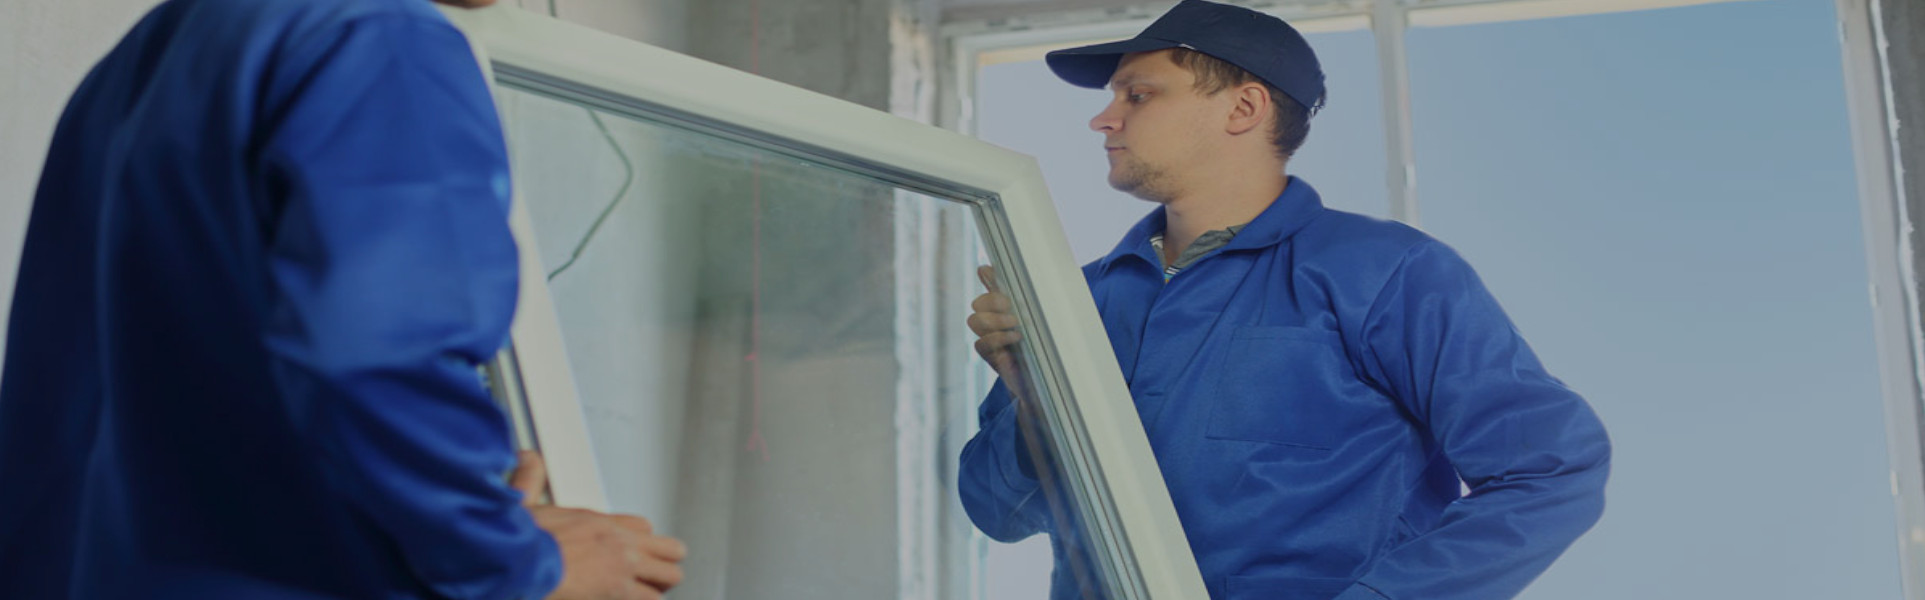 Slider, Double Glazing Installers in Manor Park, E12